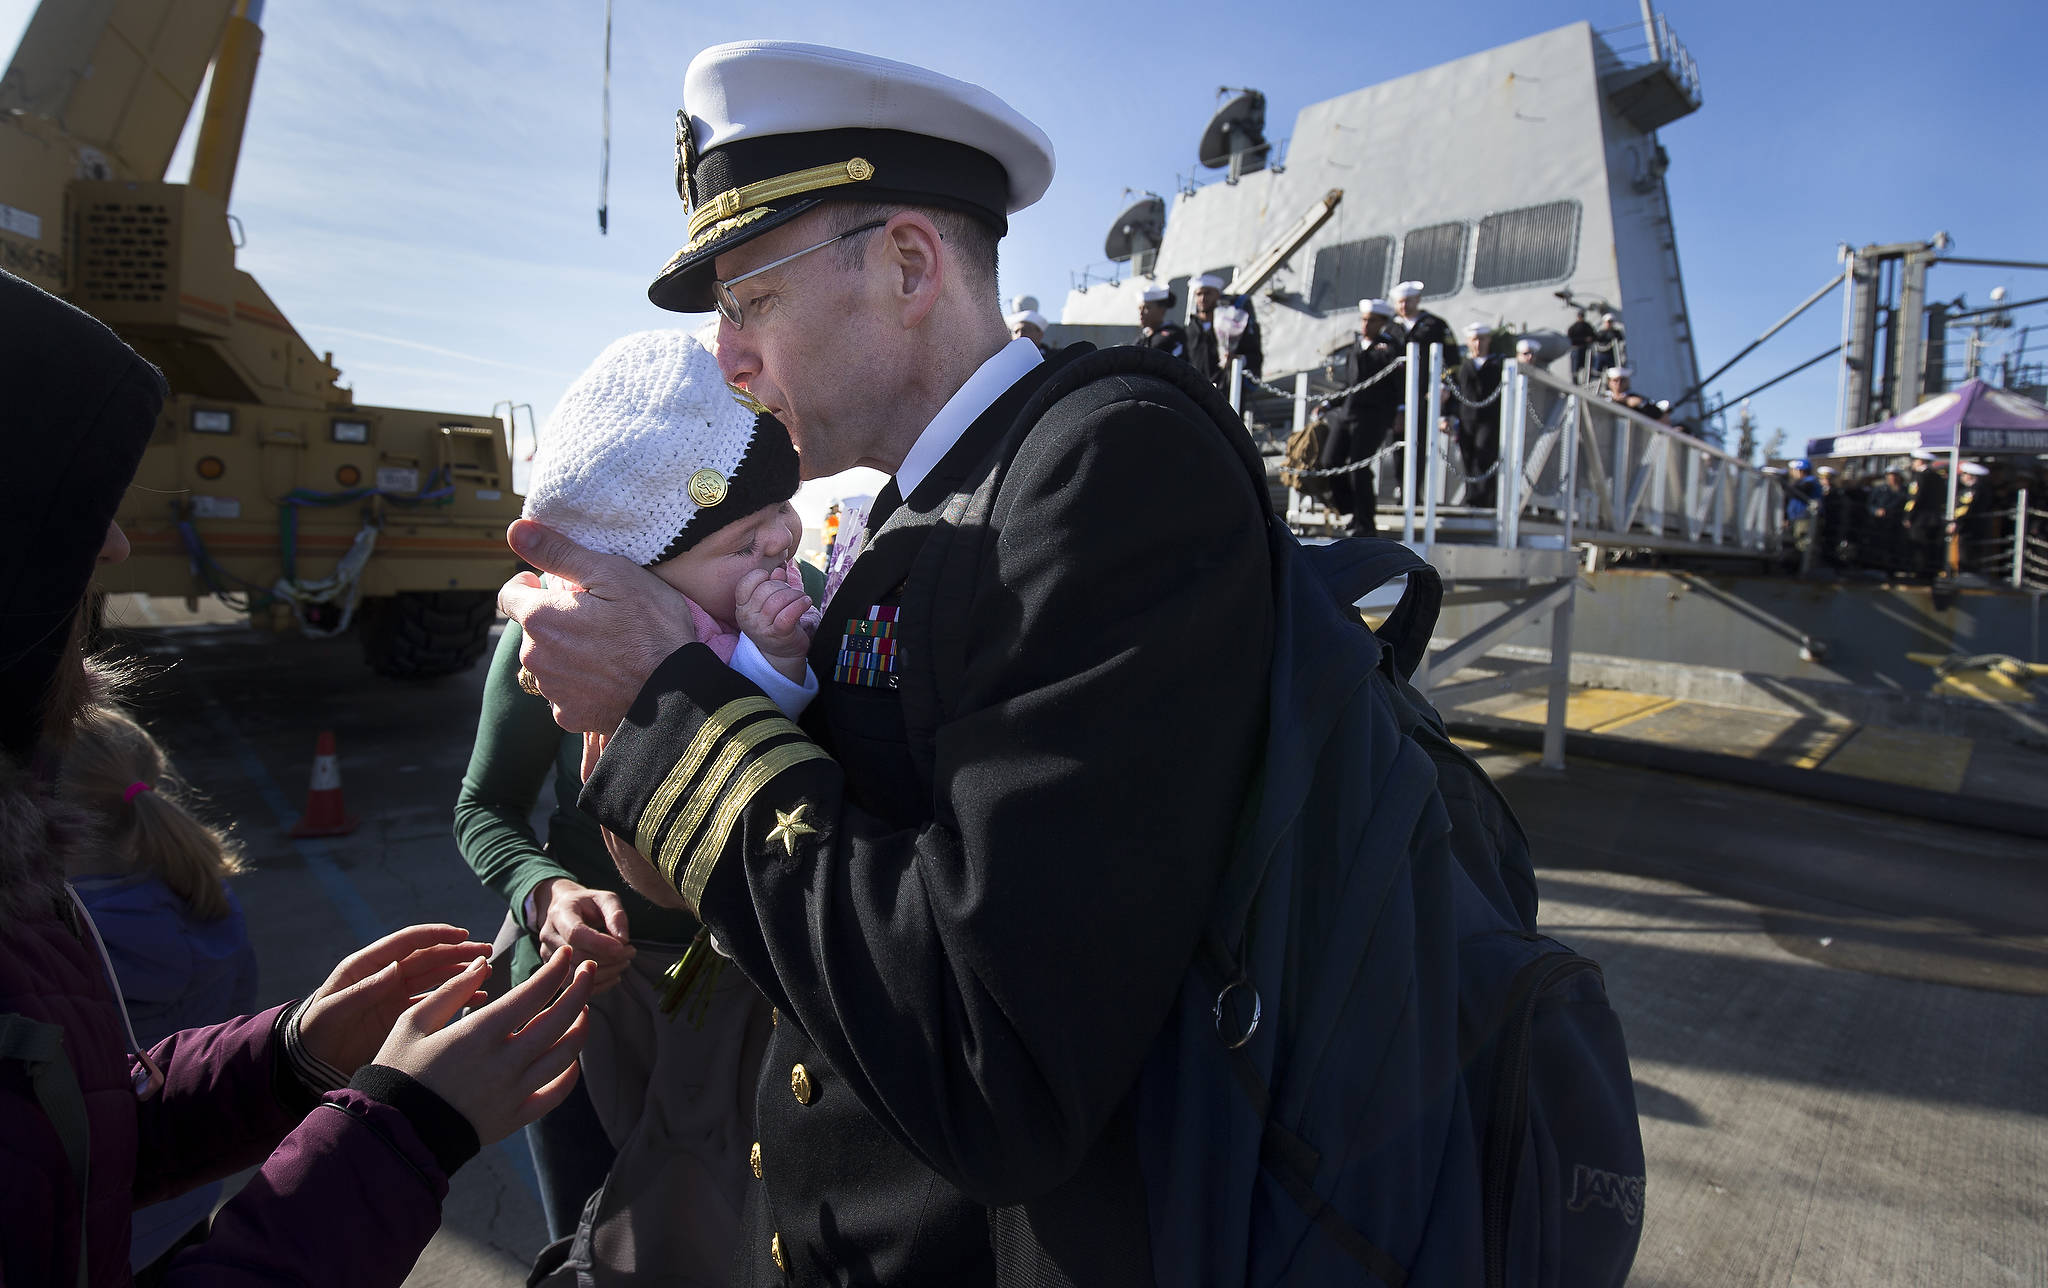 Cmdr. Robert Laird greets his three-month old daughter, Agnes, for the first time as the USS Momsen returns Monday to Naval Station Everett. (Andy Bronson / The Herald)                                Commander Robert Laird greets his three-month-old daughter Agnes for the first time as the USS Momsen (DDG-92) returns to Naval Station Everett after a deployment to the Pacific on Monday in Everett. (Andy Bronson / The Herald)